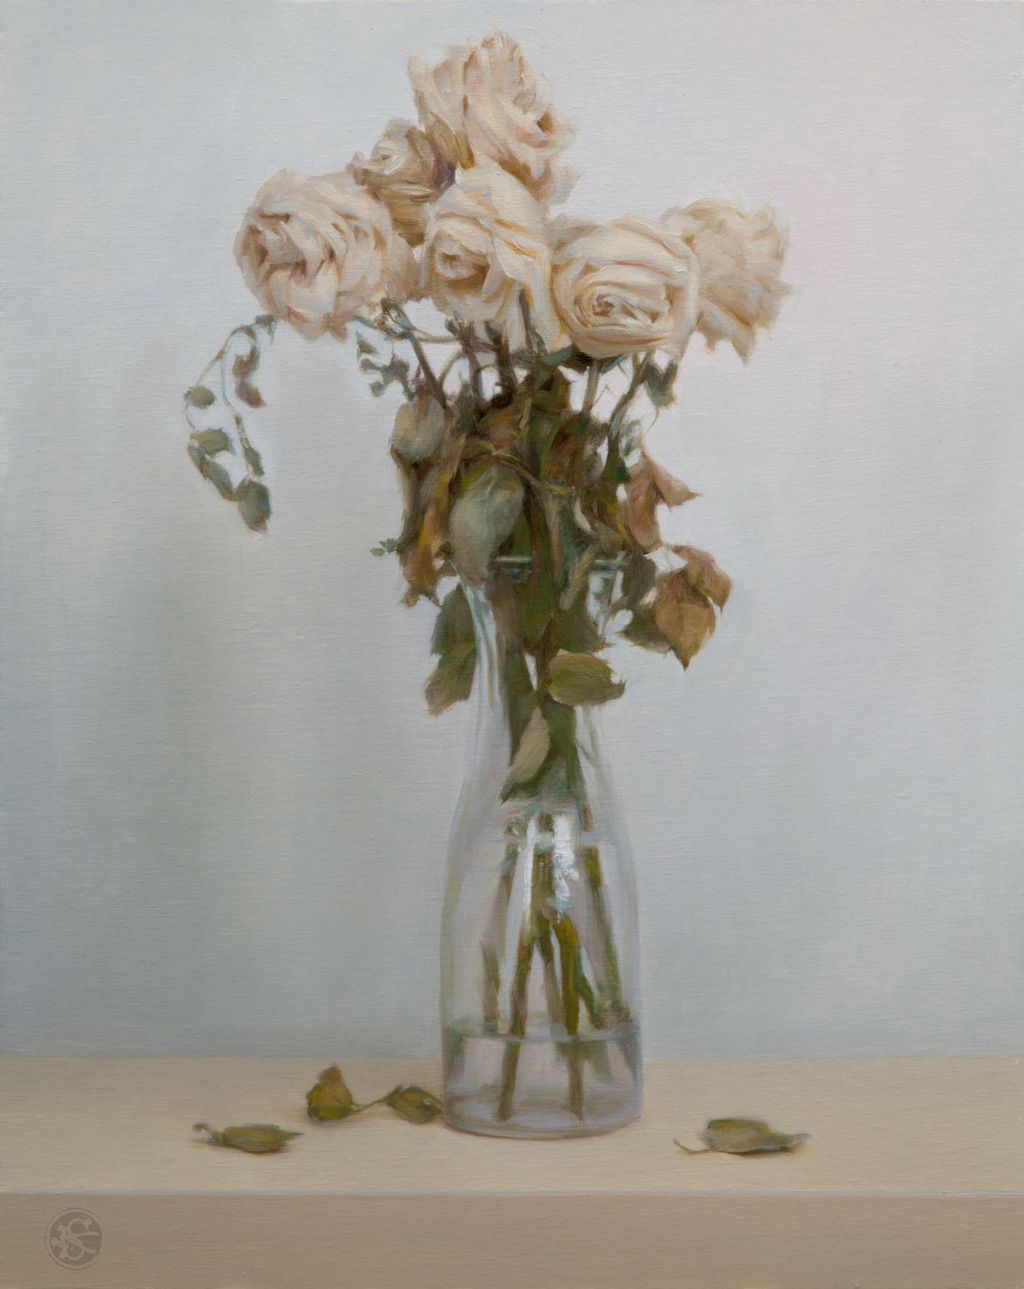 American Legacy Fine Arts presents Dead Roses a painting